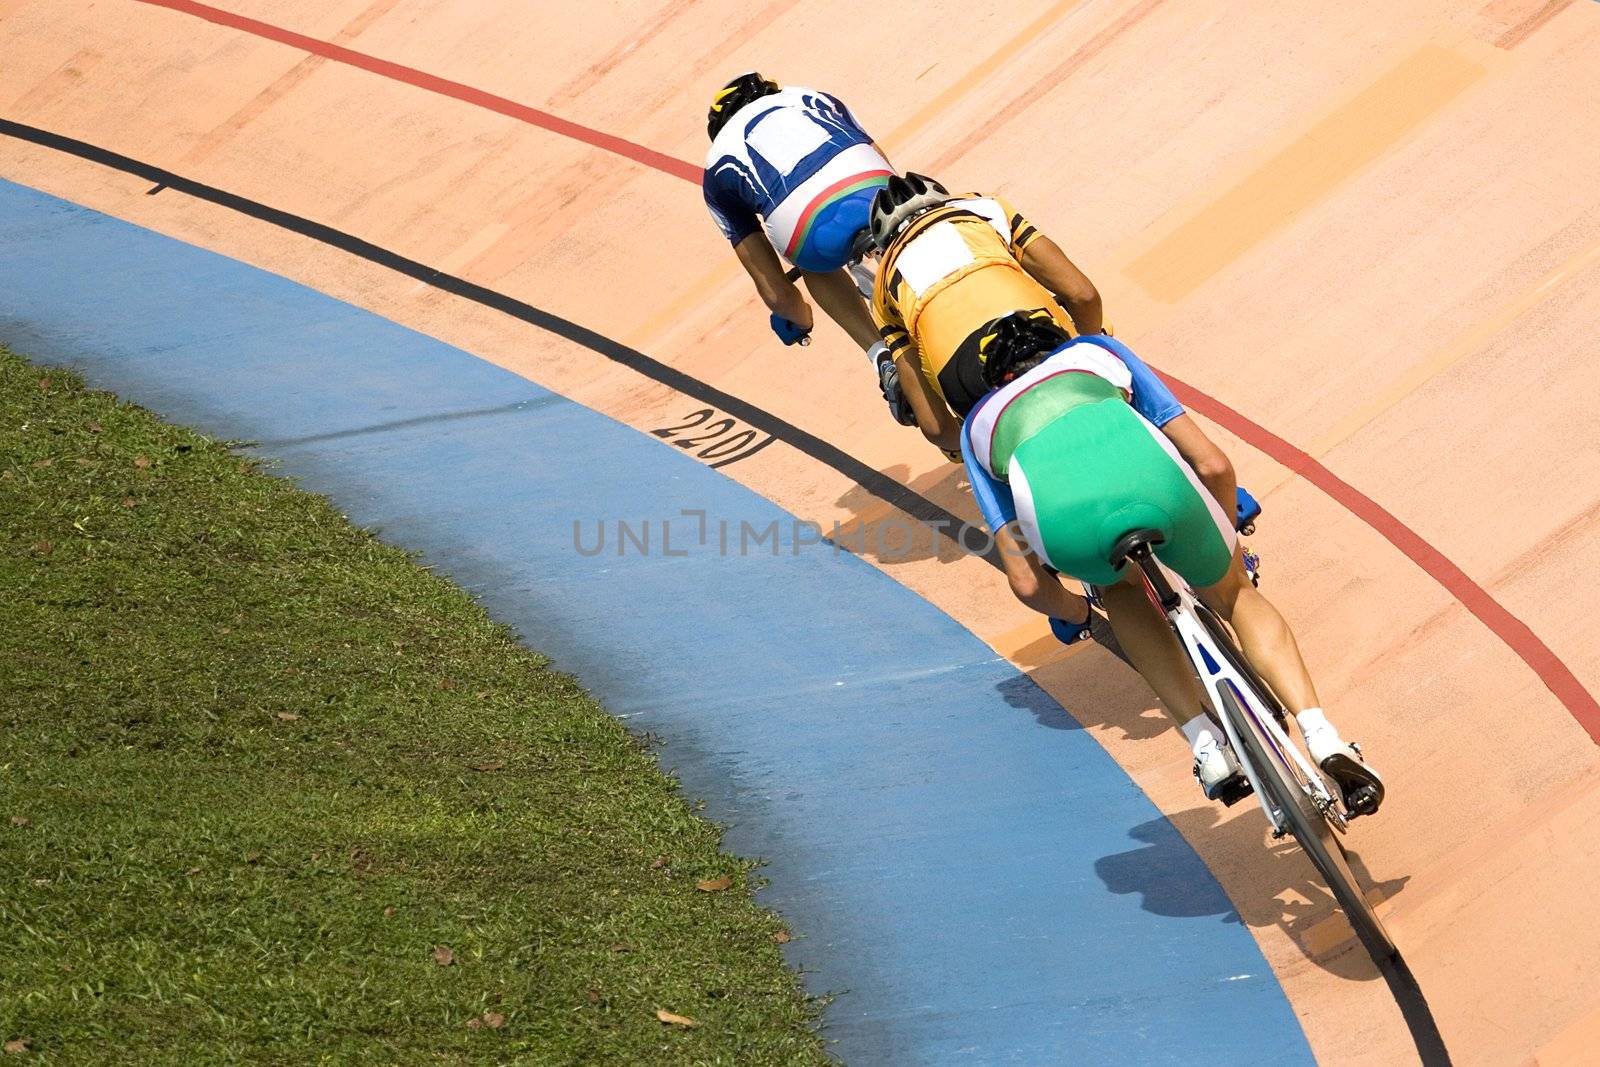 Image of participants in a cycling points race held at a velodrome.